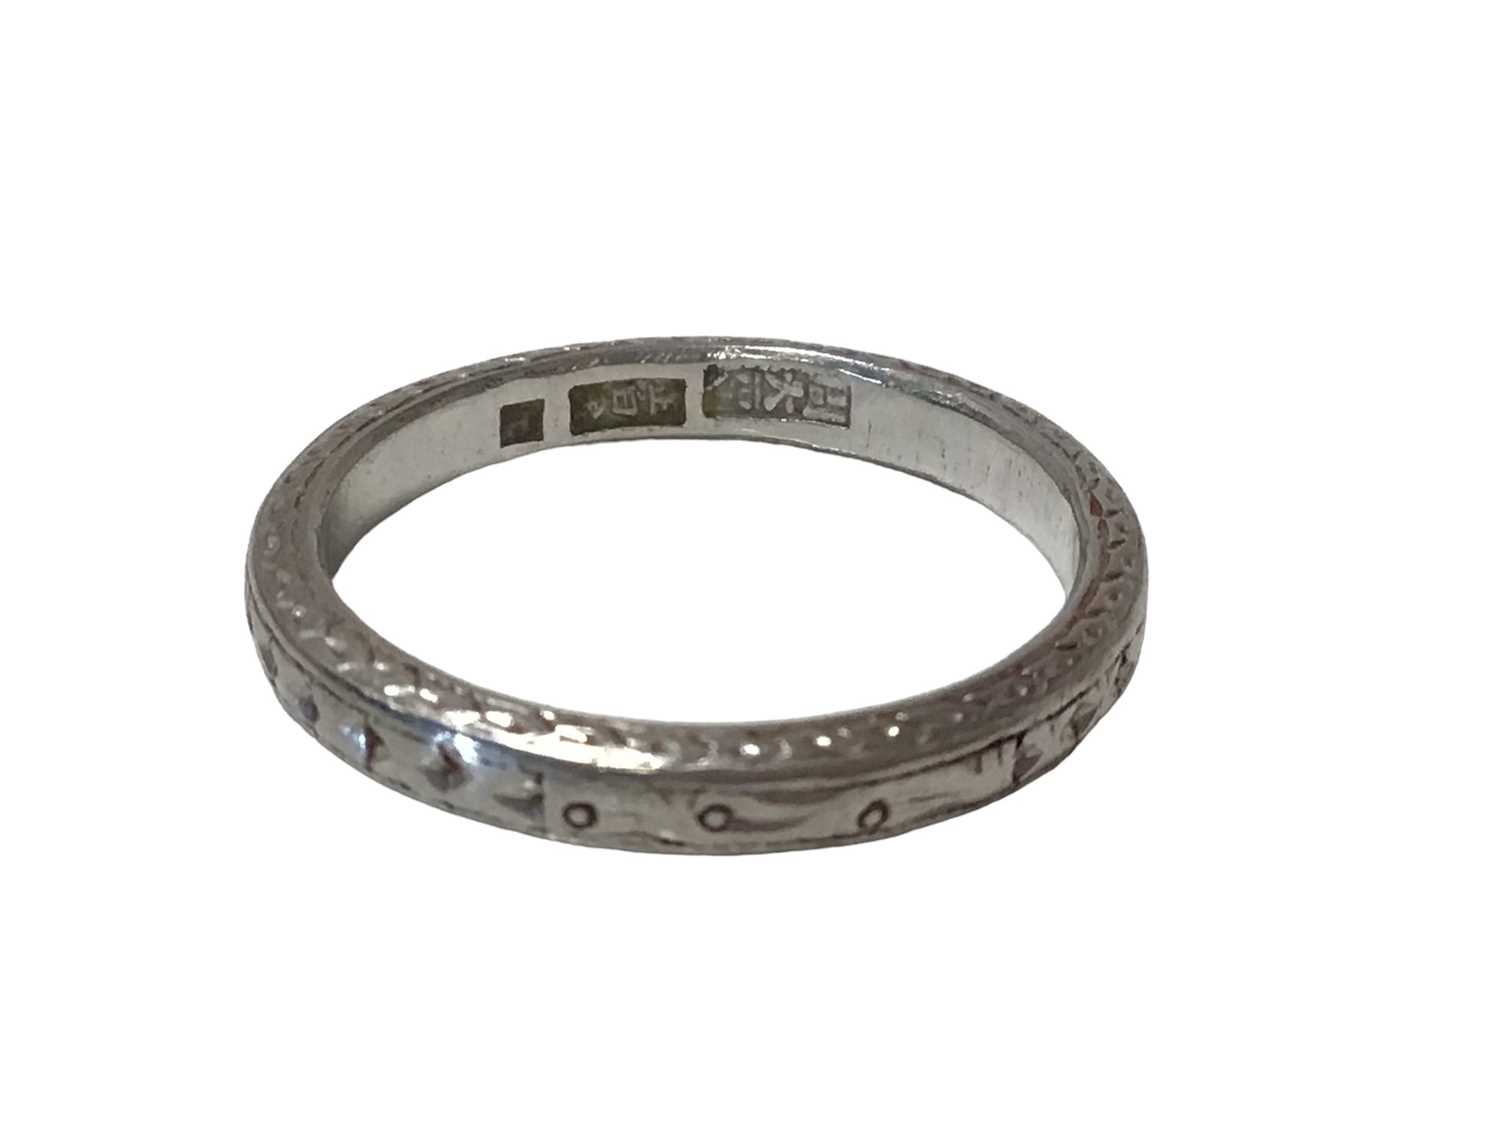 Chinese platinum wedding ring with engraved decoration, Chinese hallmarks, ring size L½. - Image 2 of 2